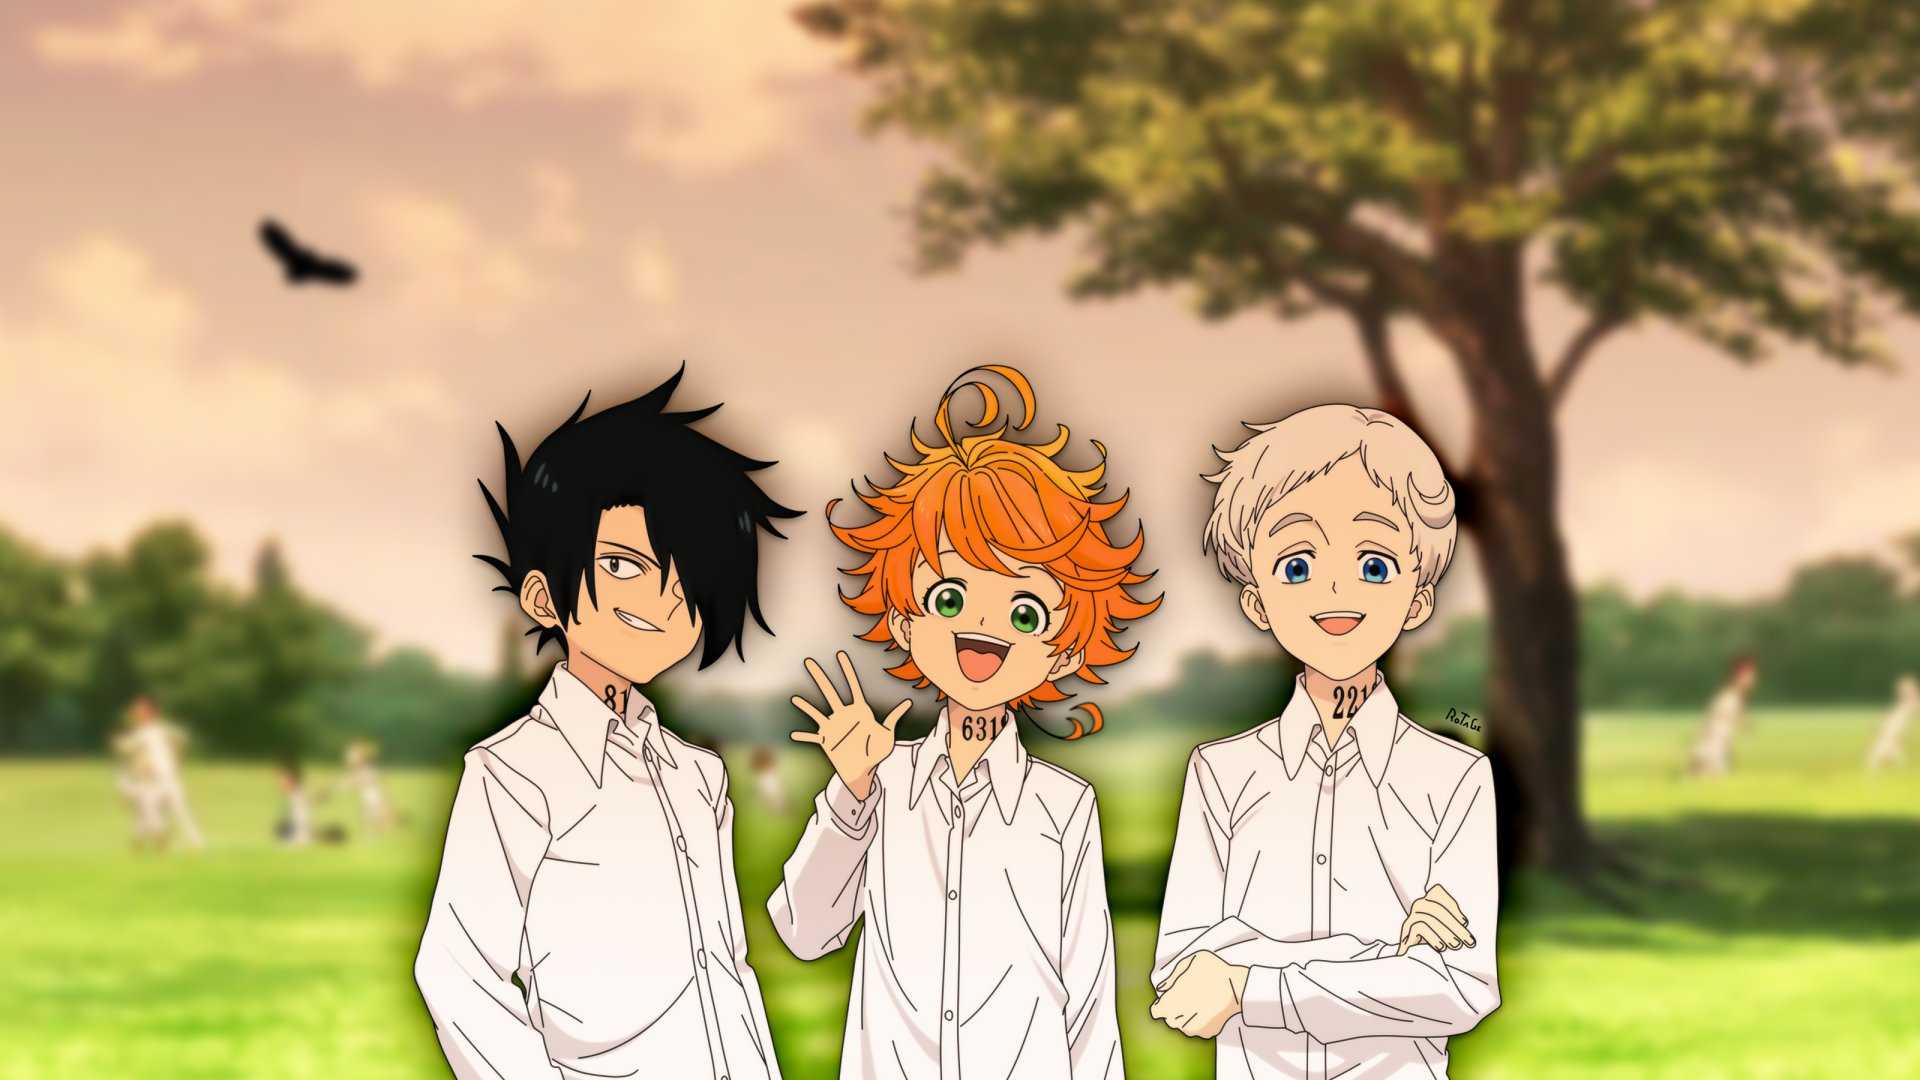 Wallpaper Promised Neverland - KoLPaPer - Awesome Free HD Wallpapers